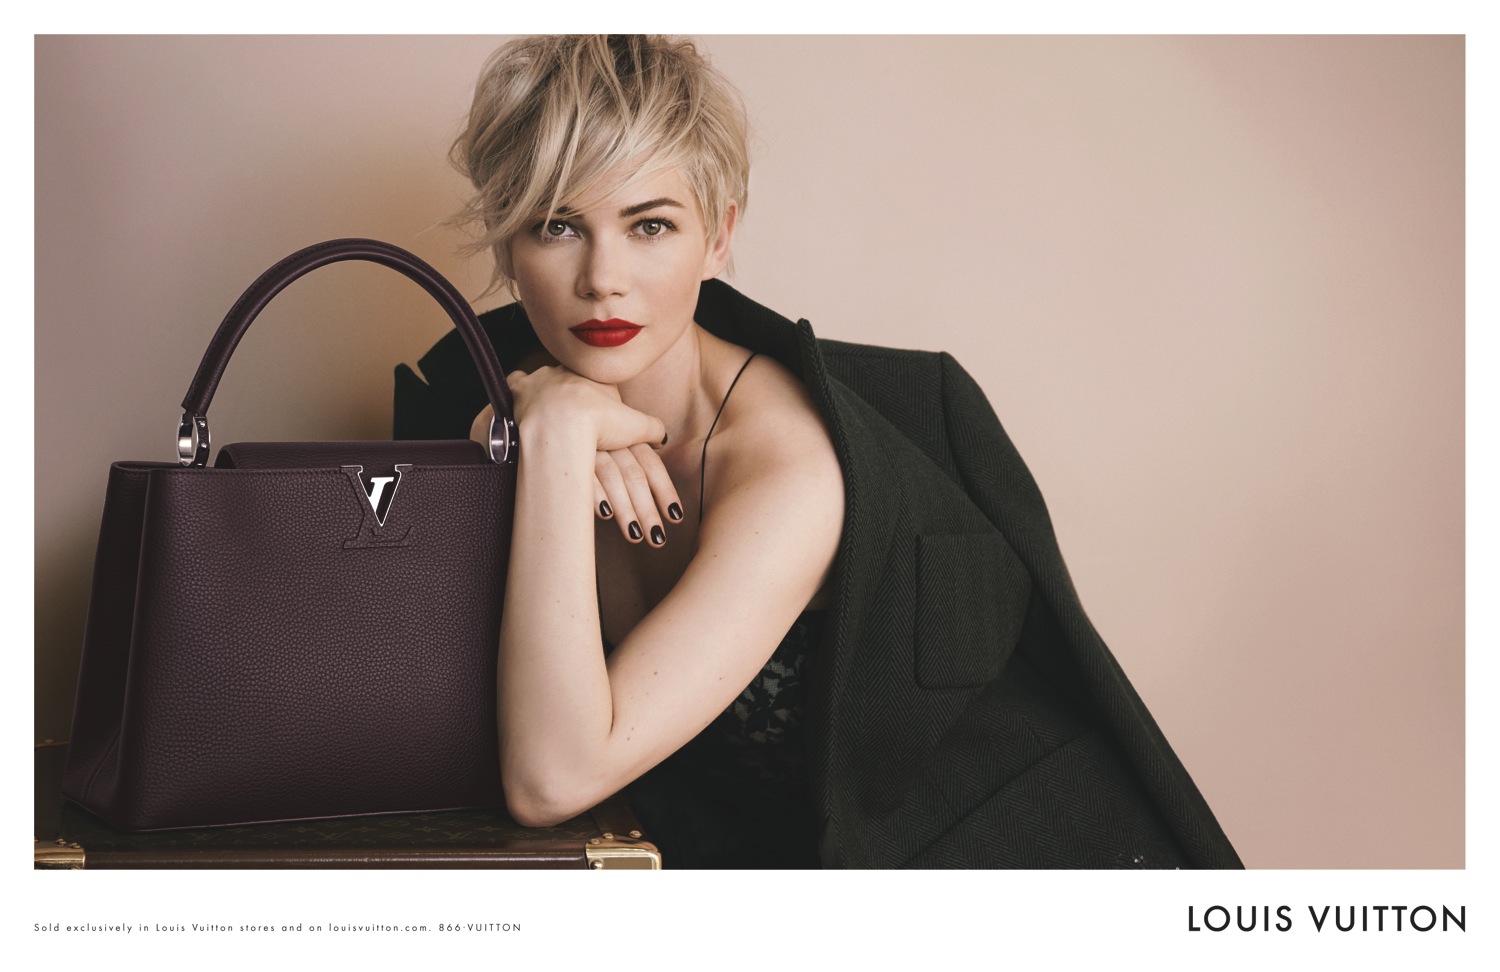 STYLE: Michelle Williams for Louis Vuitton – The Style Spree